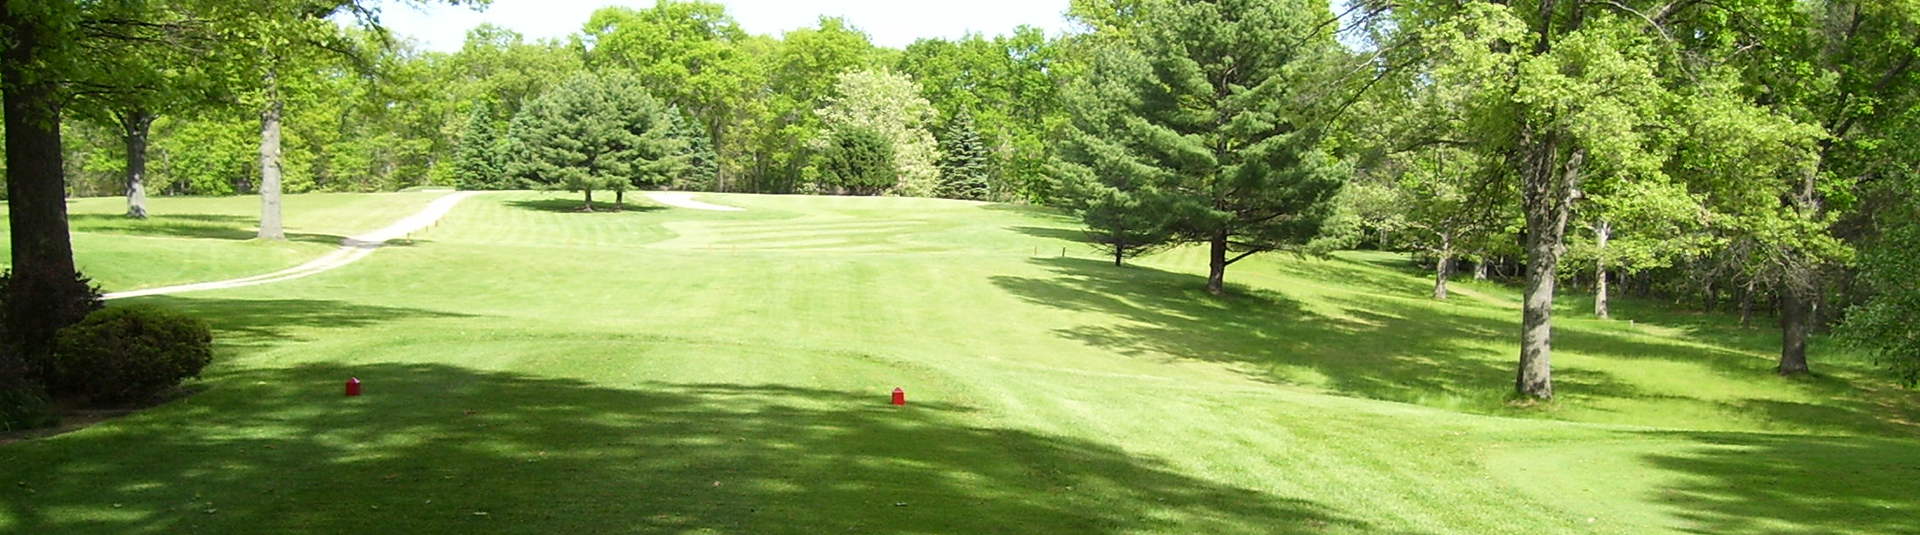 view of golf course with tree in foreground